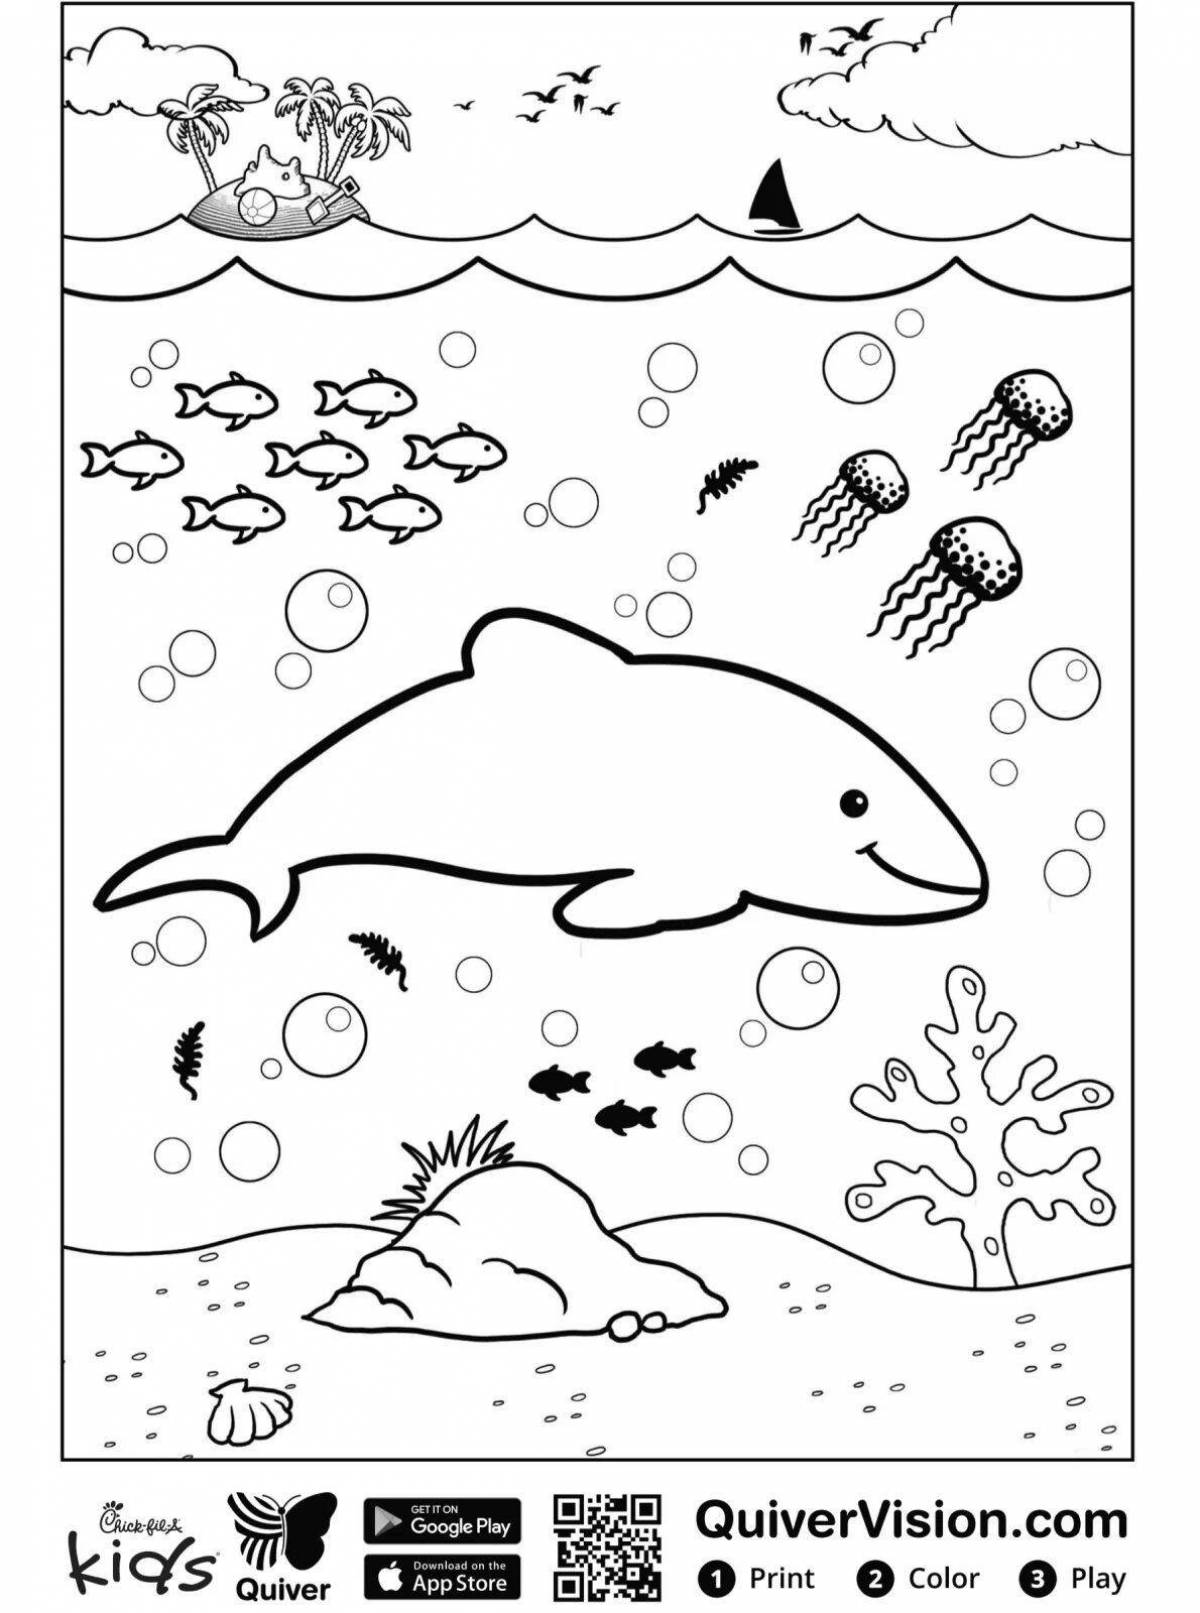 Quivervision adorable coloring page